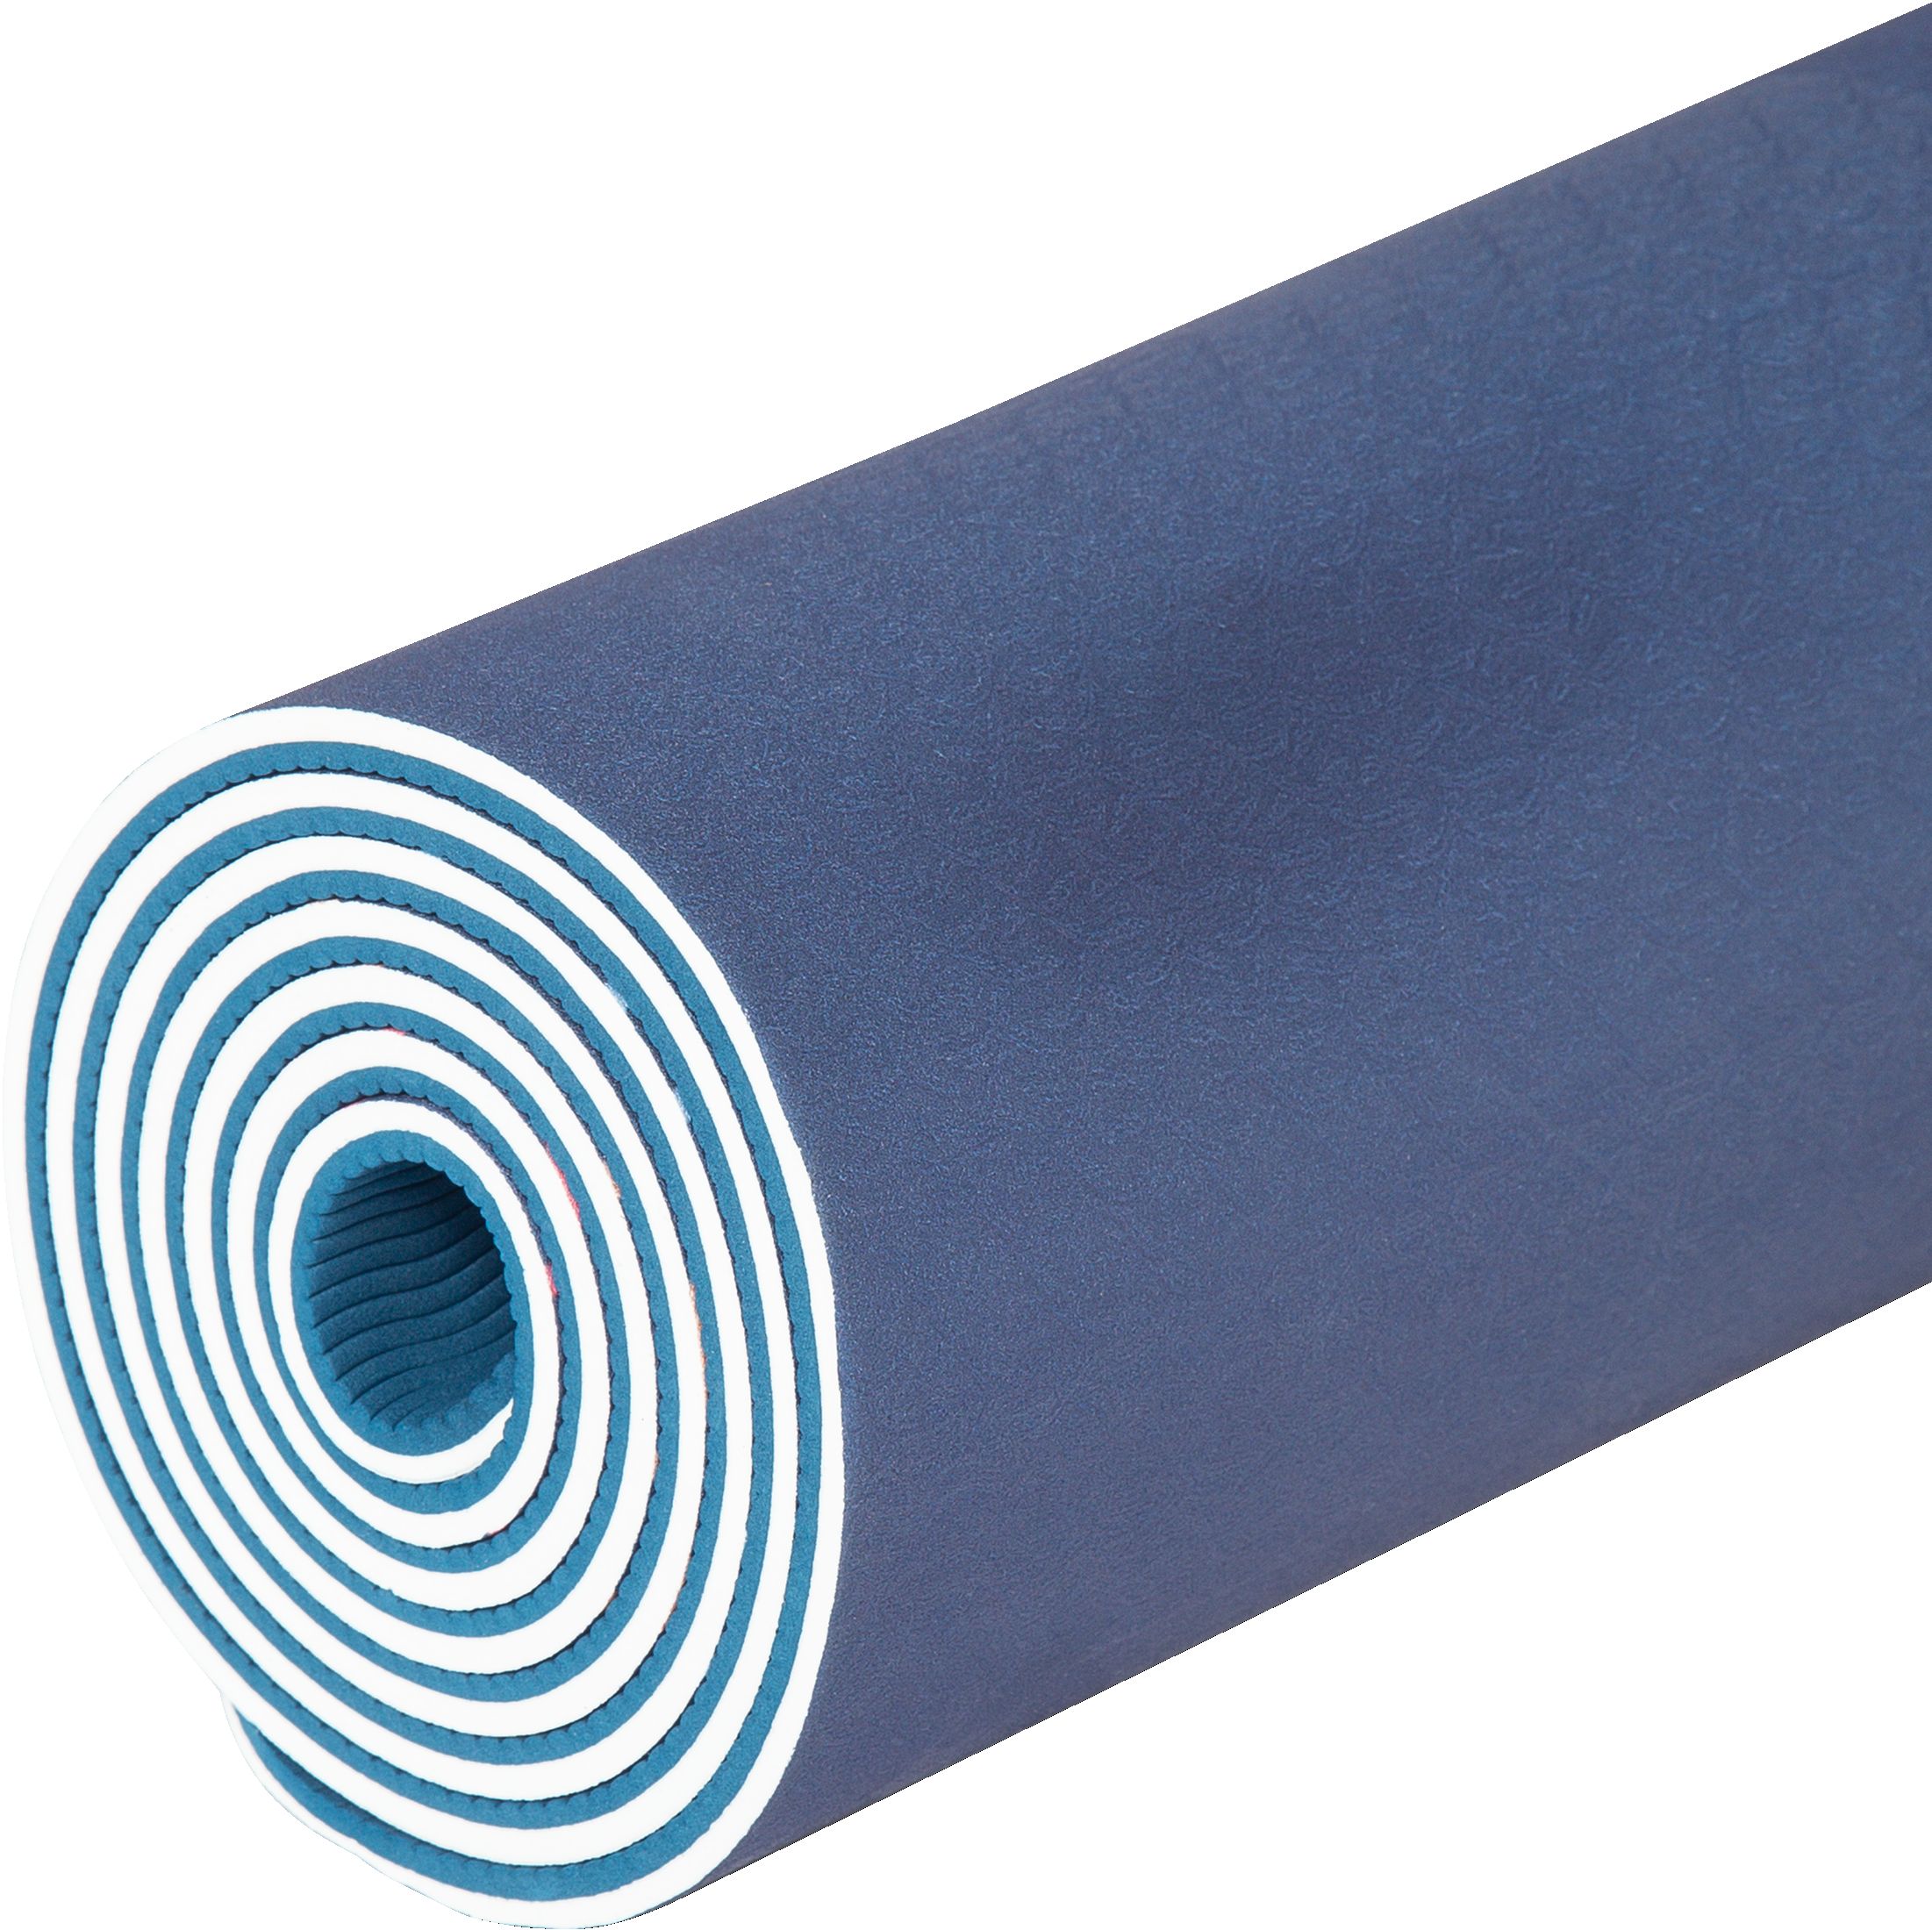 Lezyan Natural Rubber Aesthetic Yoga Mat 5mm Fitness Gym Sports